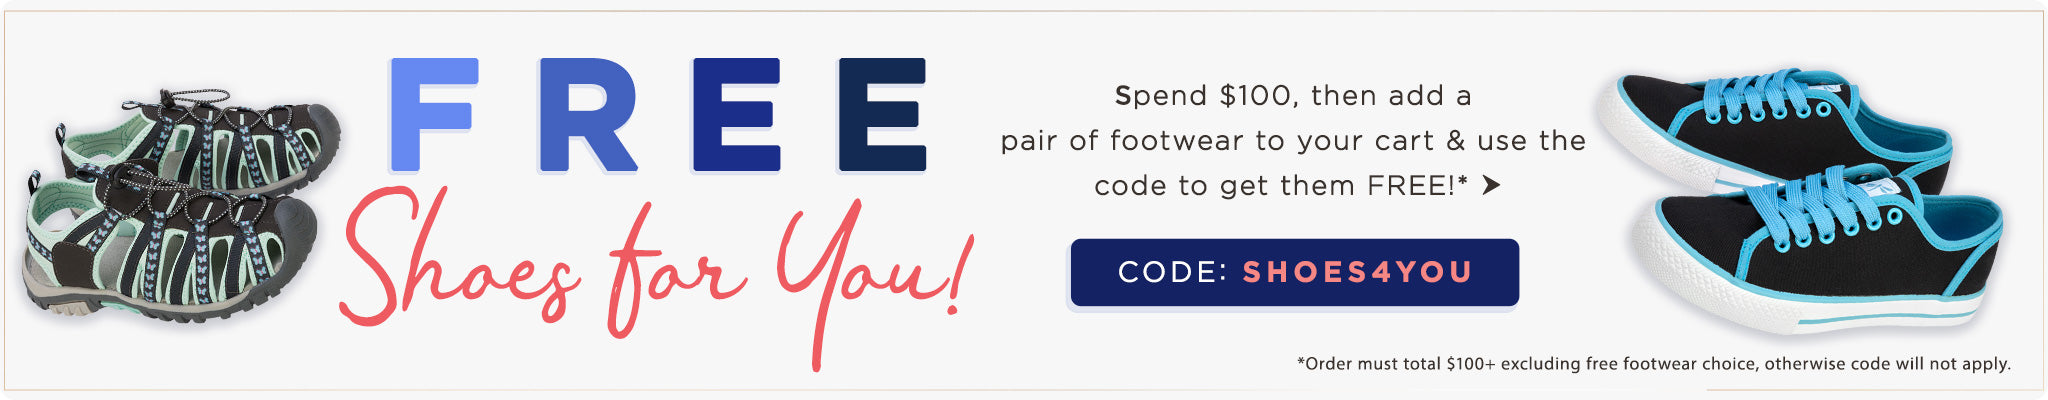 $100+ Orders Get Any Pair of Footwear for FREE | SHOES4YOU | Order must total $100+ excluding free footwear choice, otherwise code will not apply.